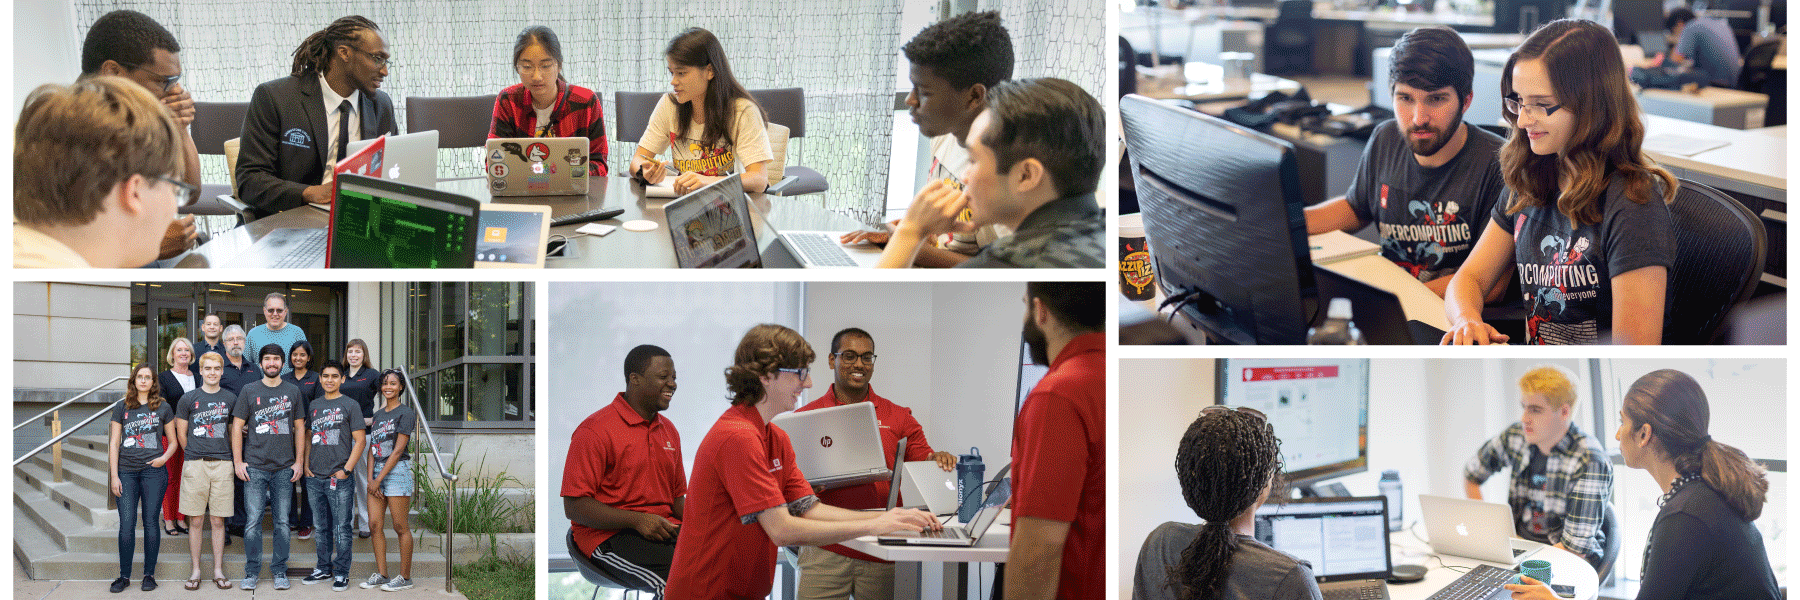 Photo collage of REU students working on computers